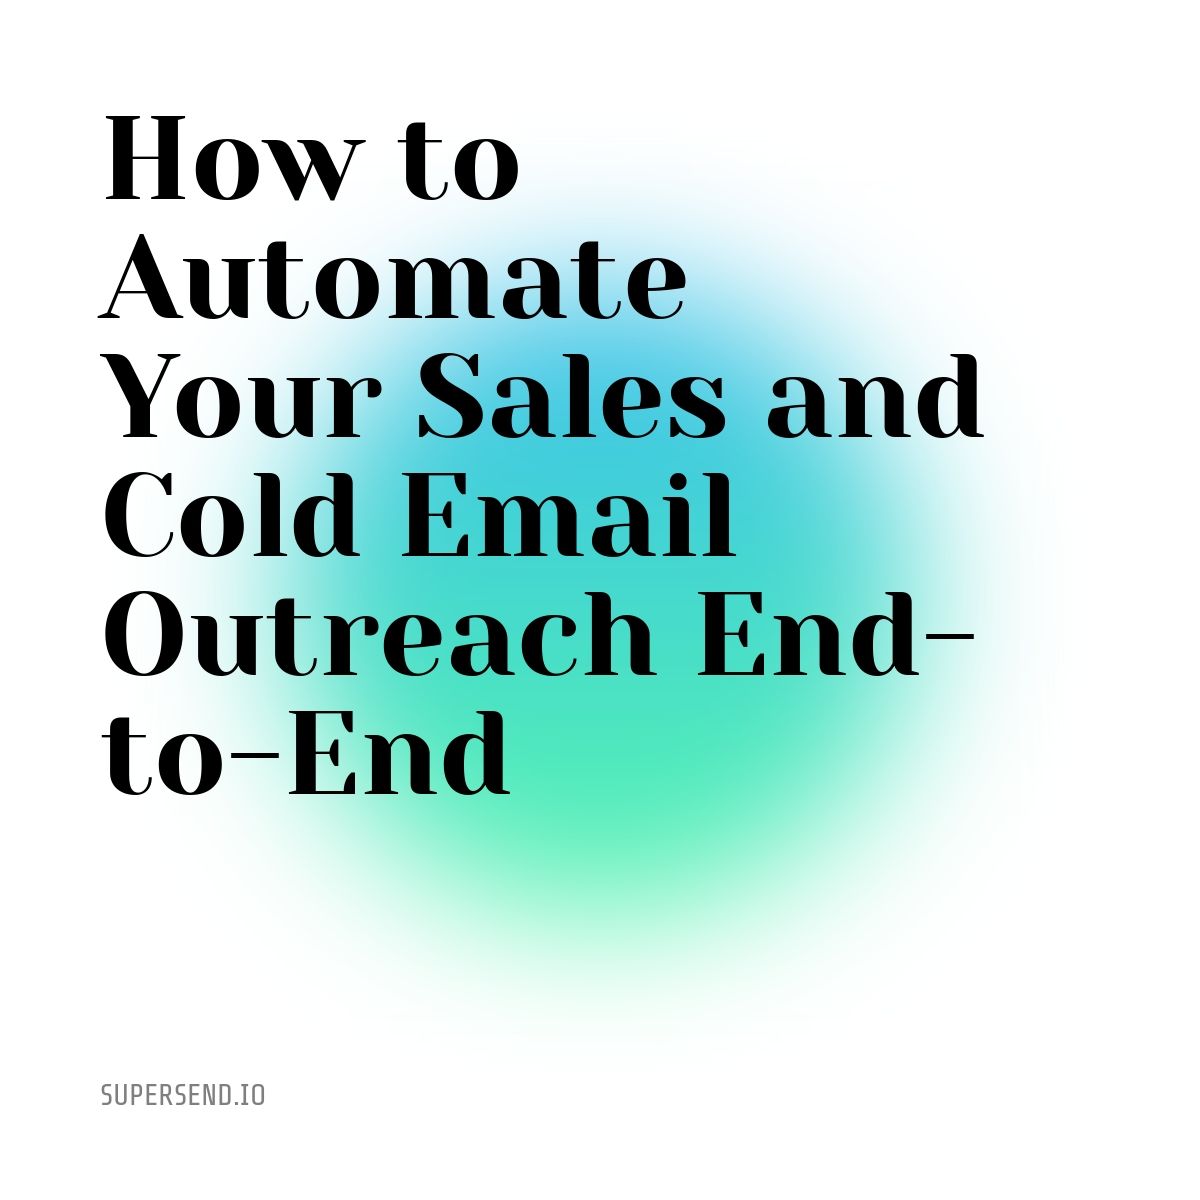 How to Automate Your Sales and Cold Email Outreach End-to-End